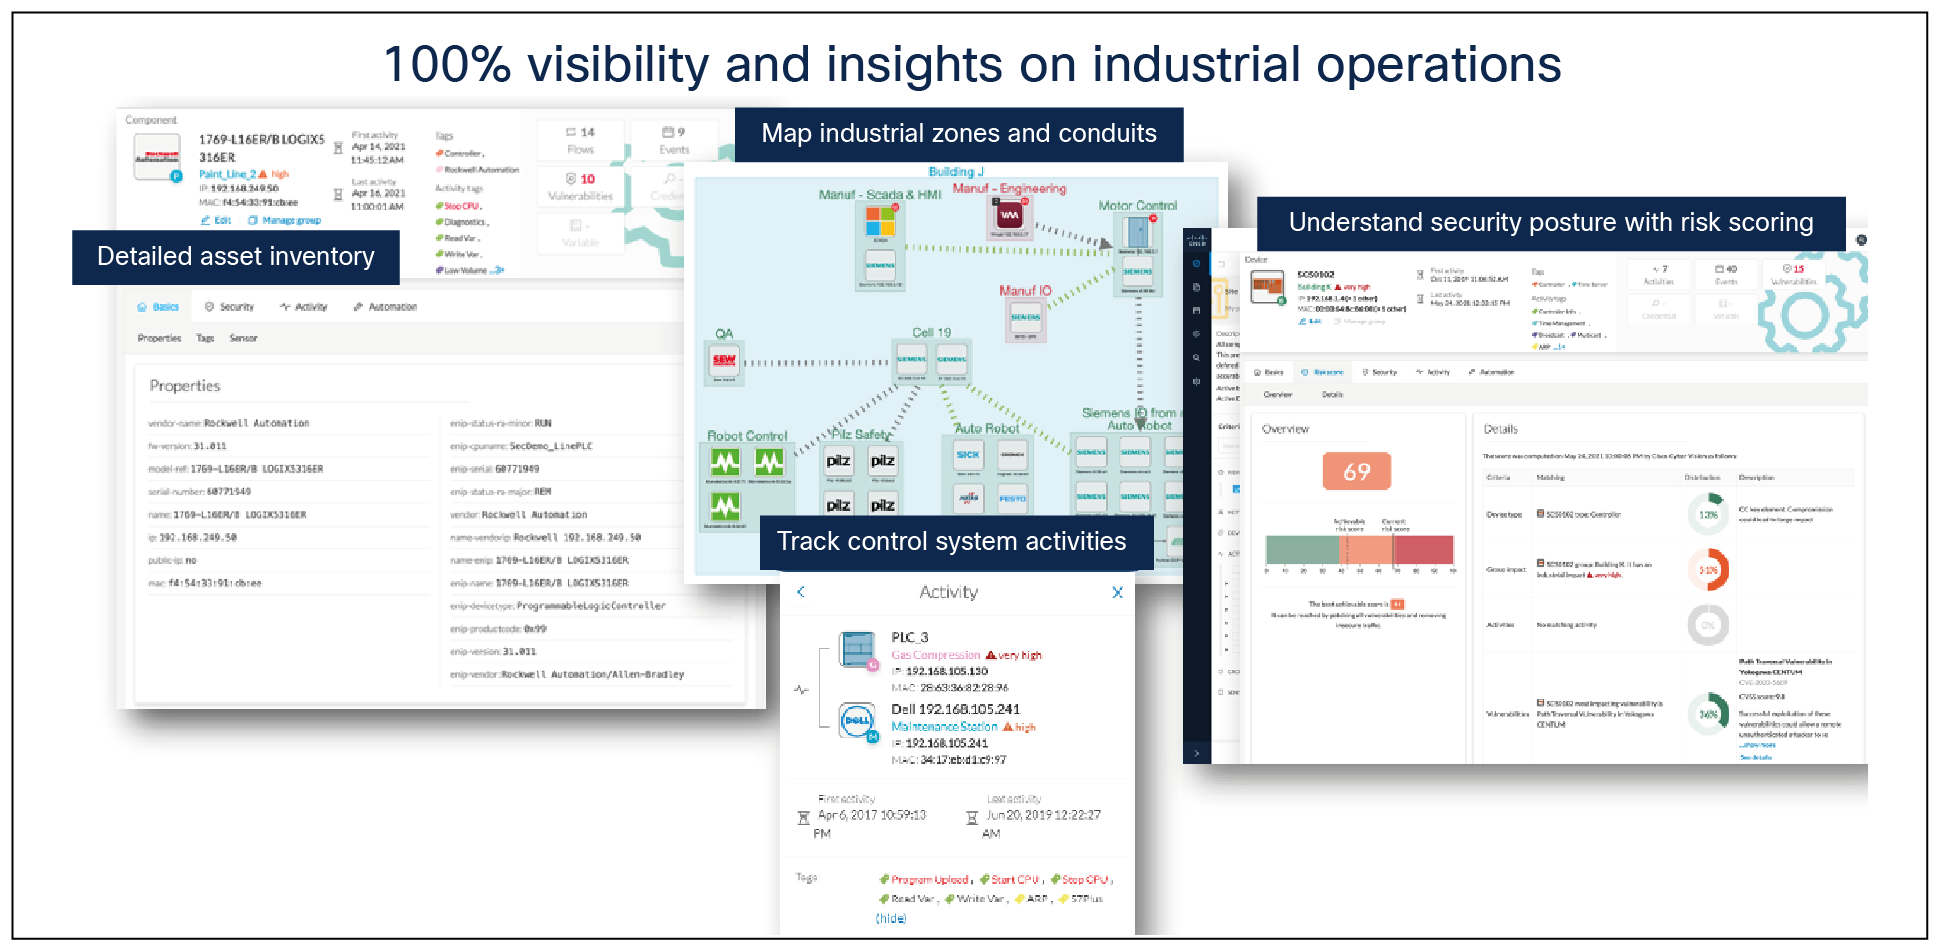 Gain operational insights into your assets, industrial processes, and communication flows